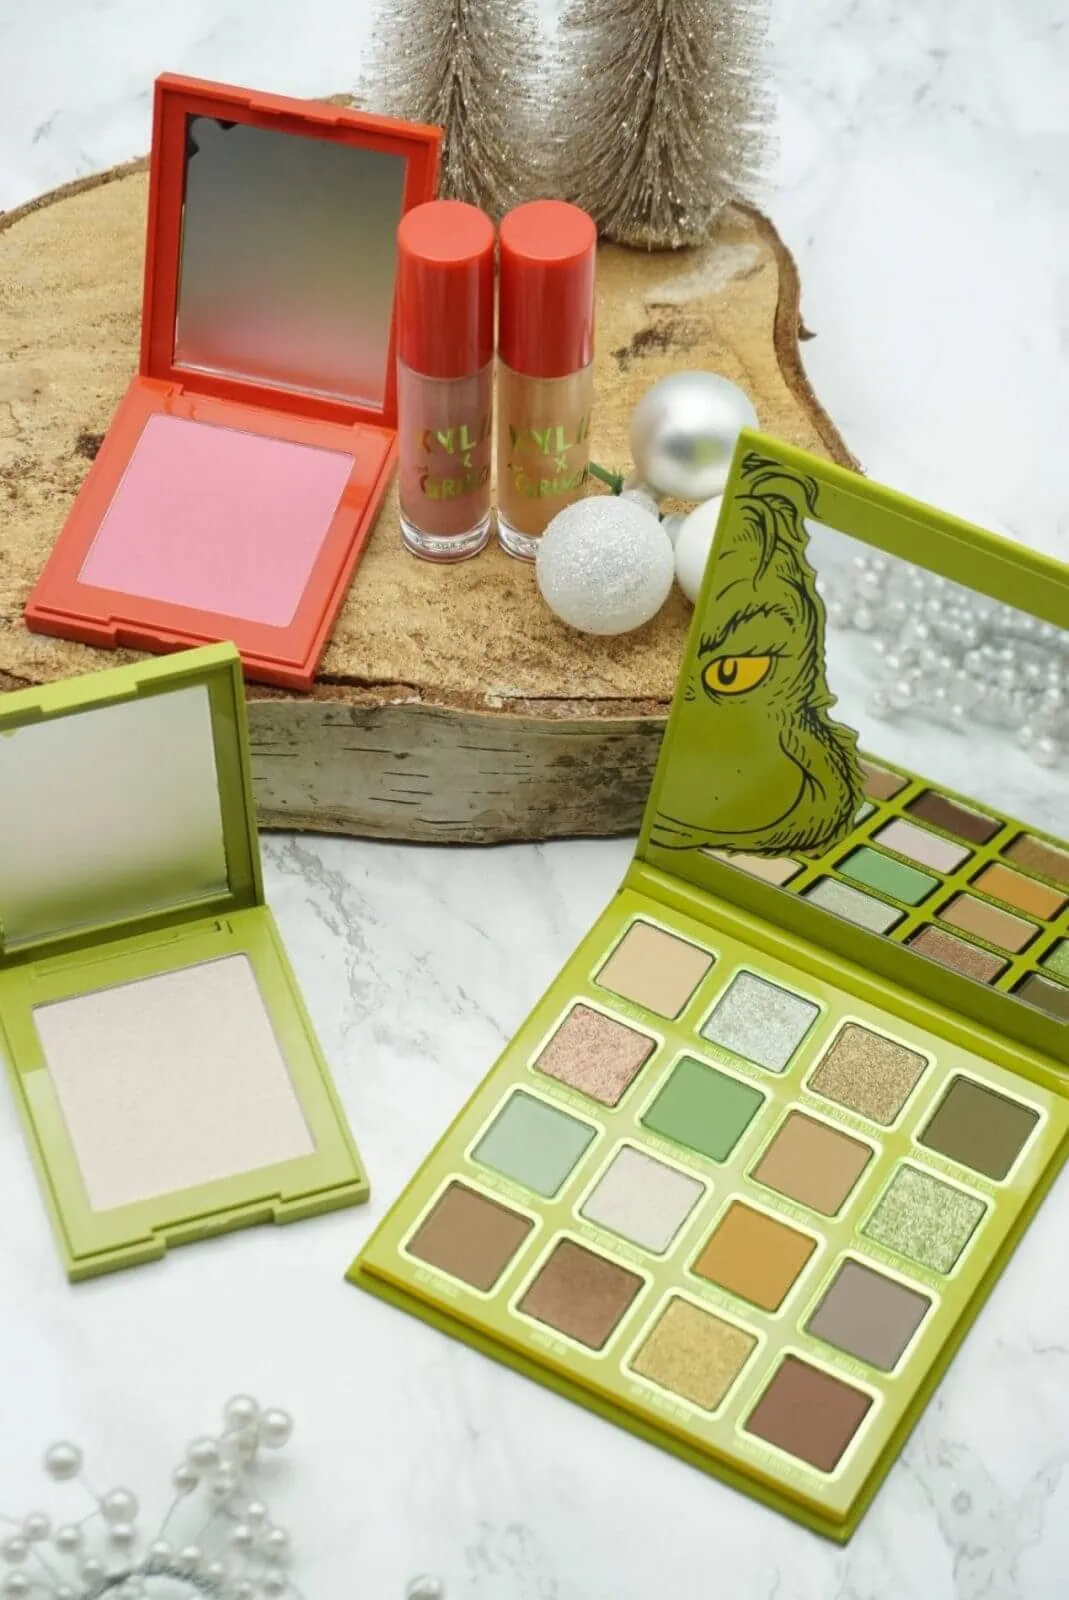 Kylie Cosmetics x The Grinch Holiday Collection 2020